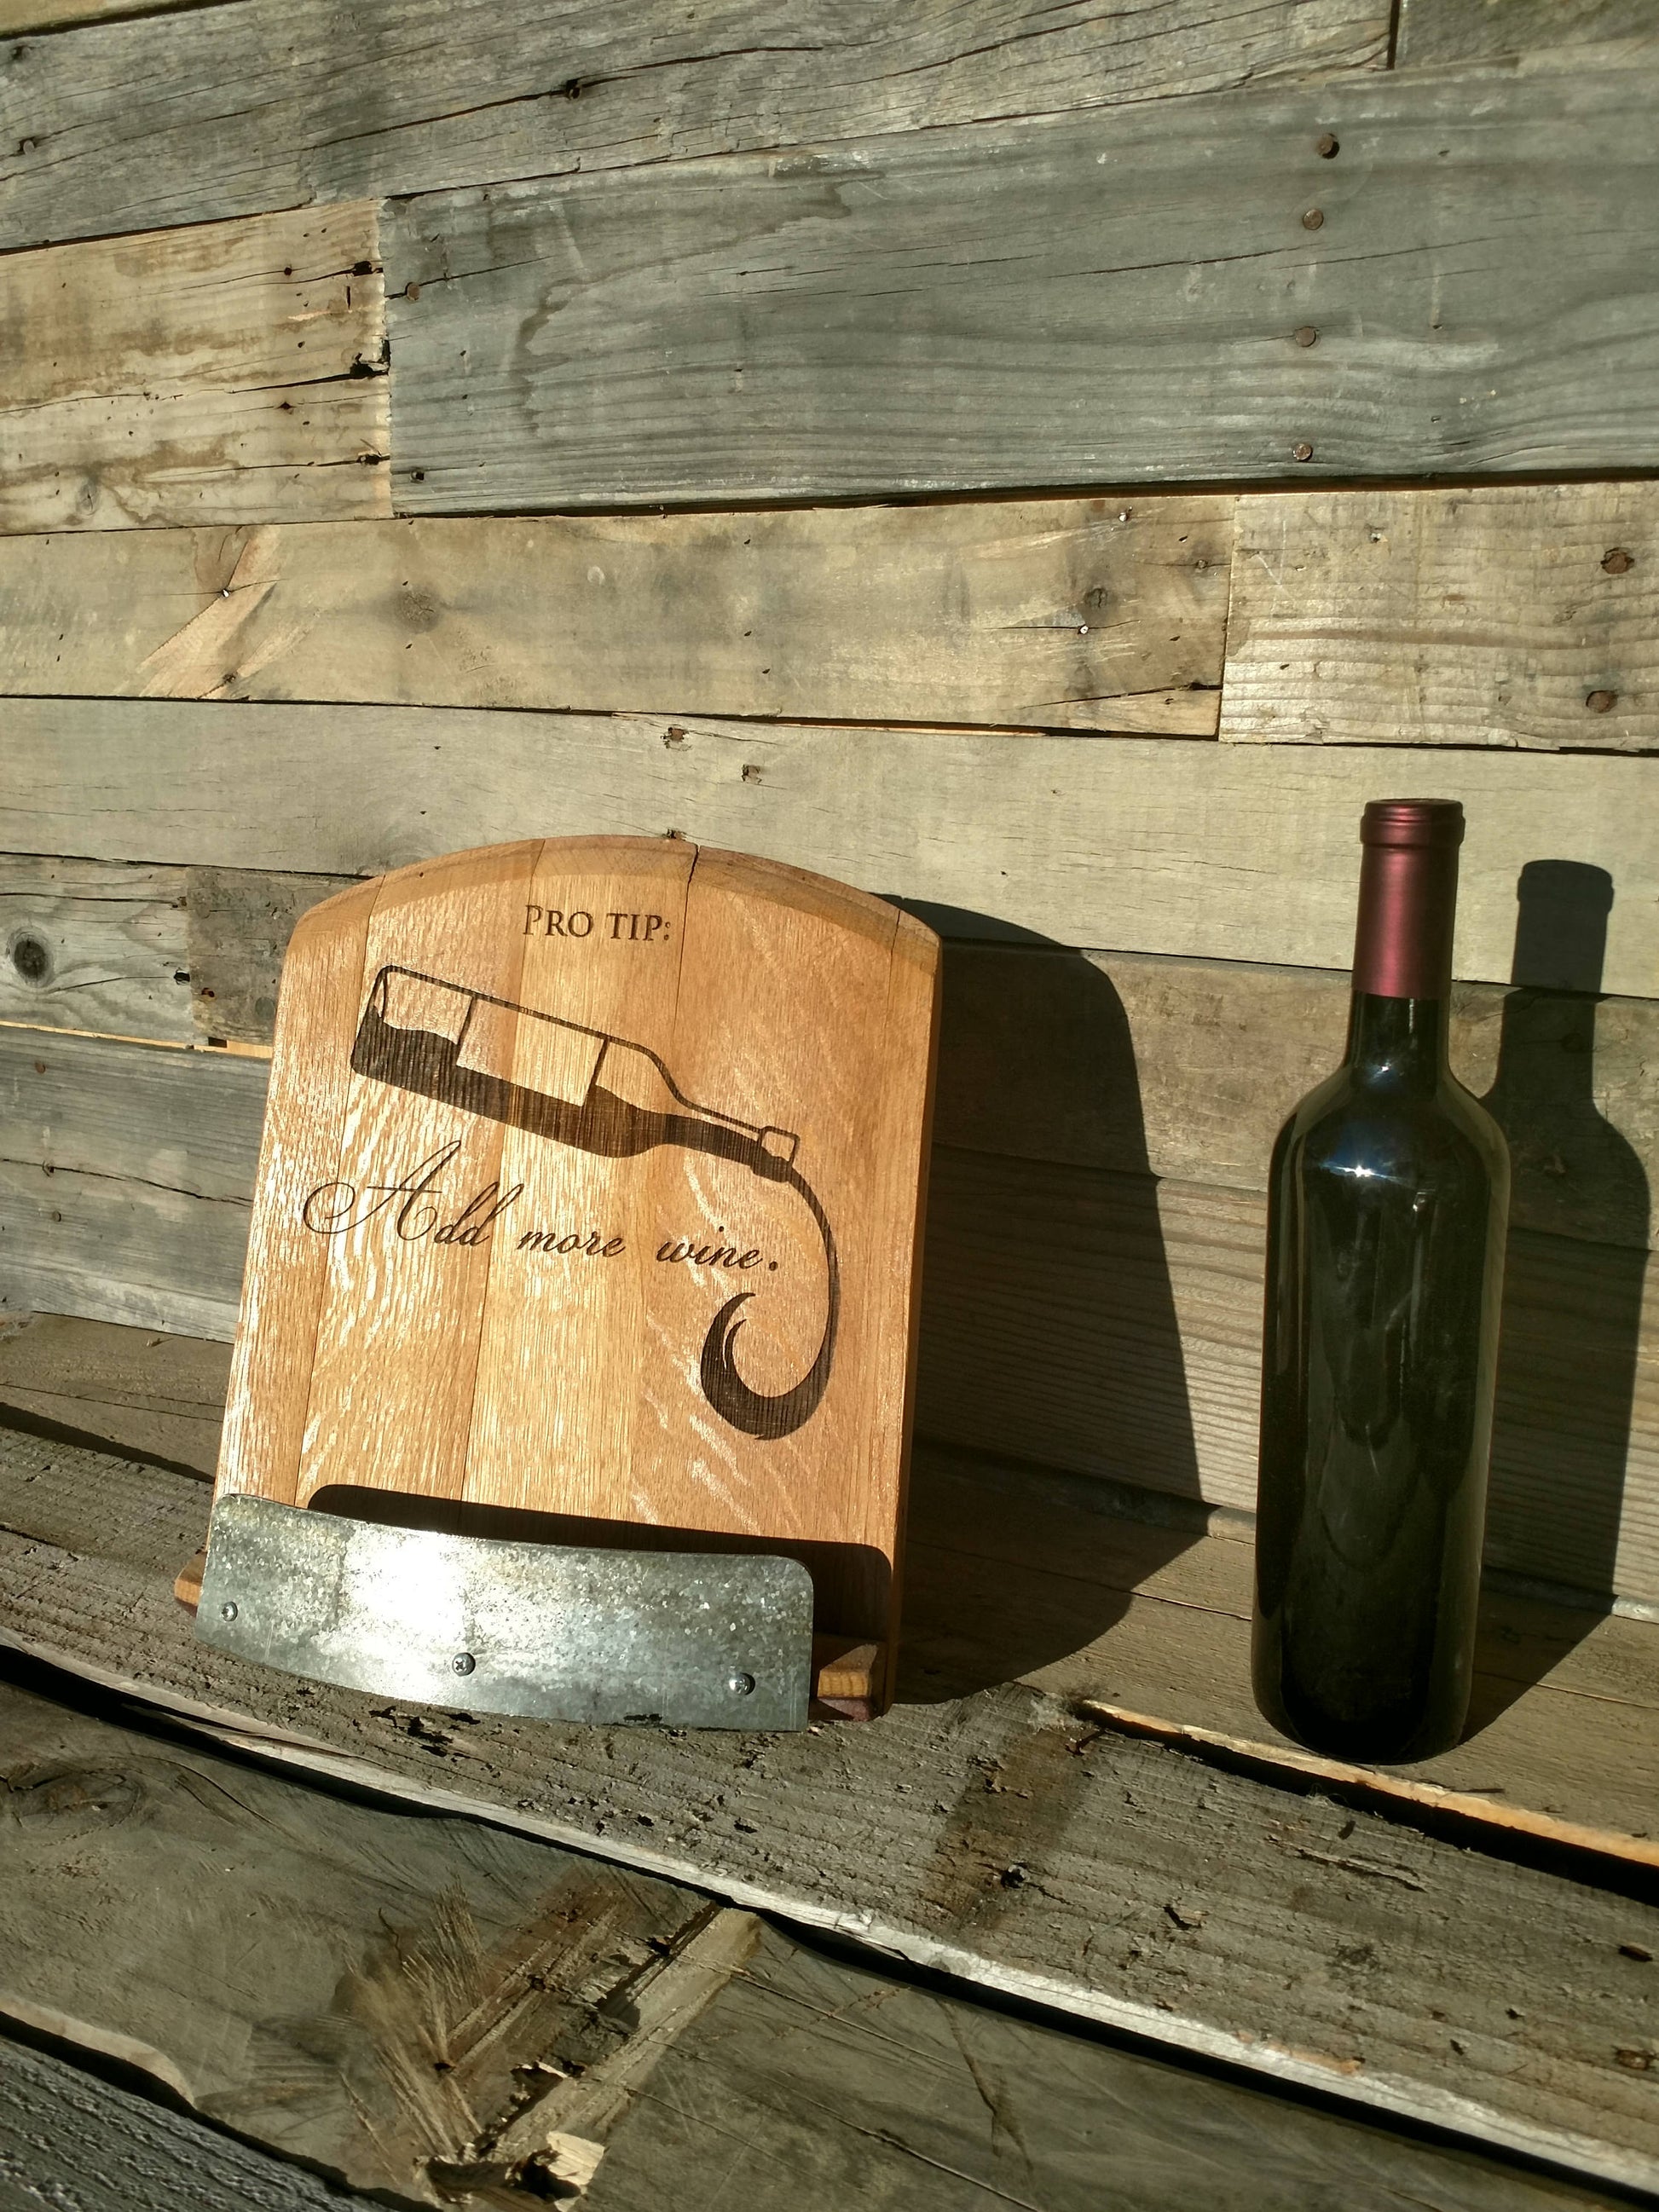 Wine Barrel Cookbook Stand and Tablet Holder - Tuki - Made from reclaimed wine barrels. 100% Recycled!